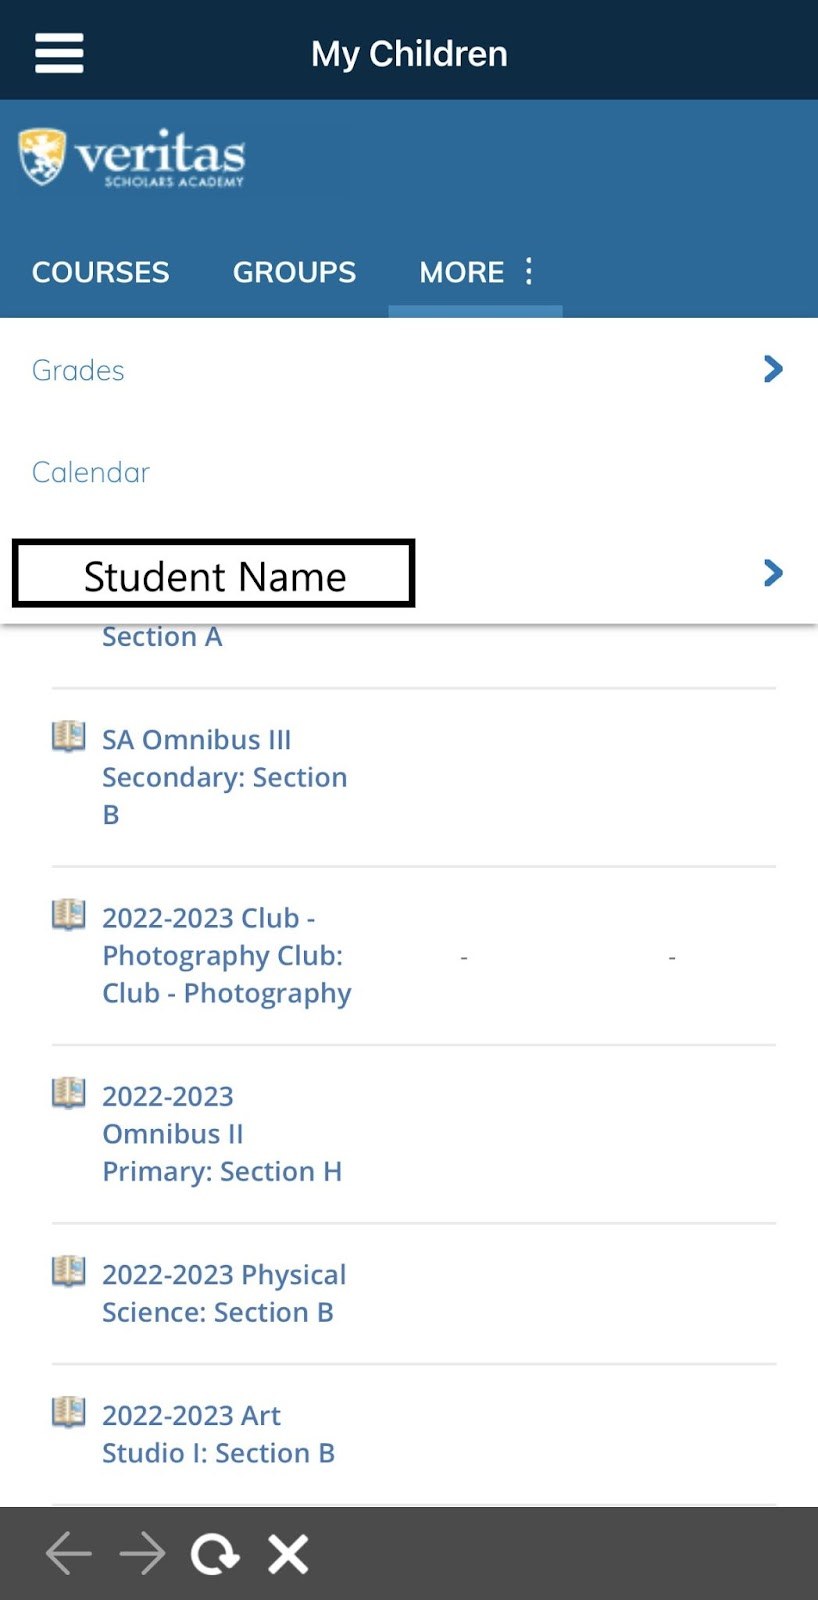 Click “MORE:” Then click the Student Name to get to the menu to choose between students/parent view. Students have courses. Select a student to view their courses and grades.